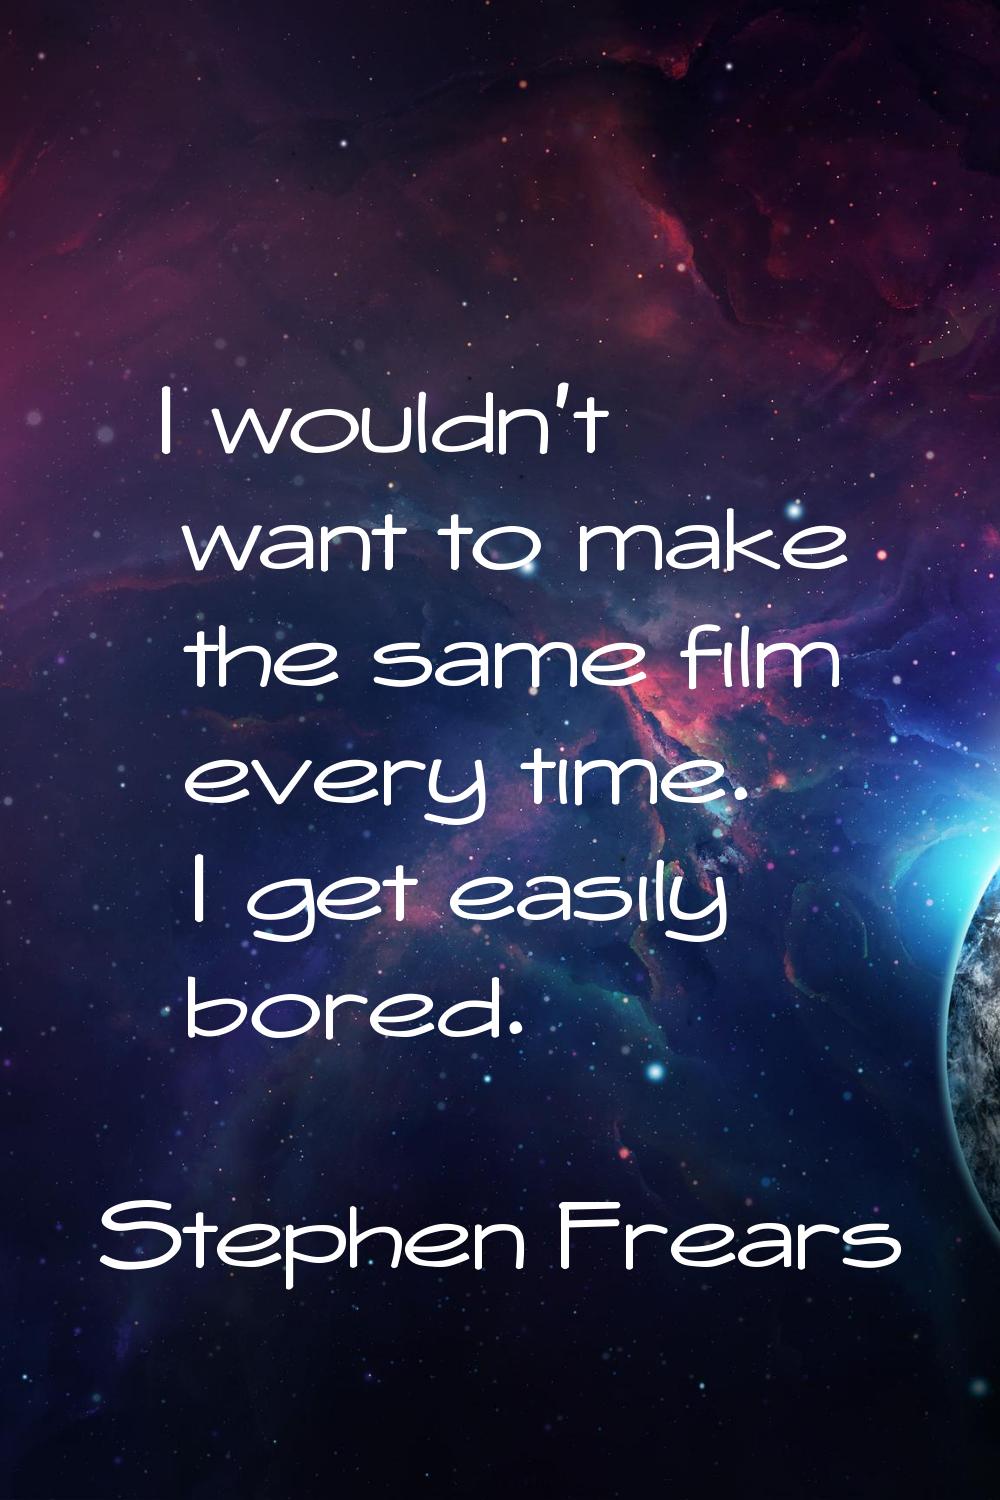 I wouldn't want to make the same film every time. I get easily bored.